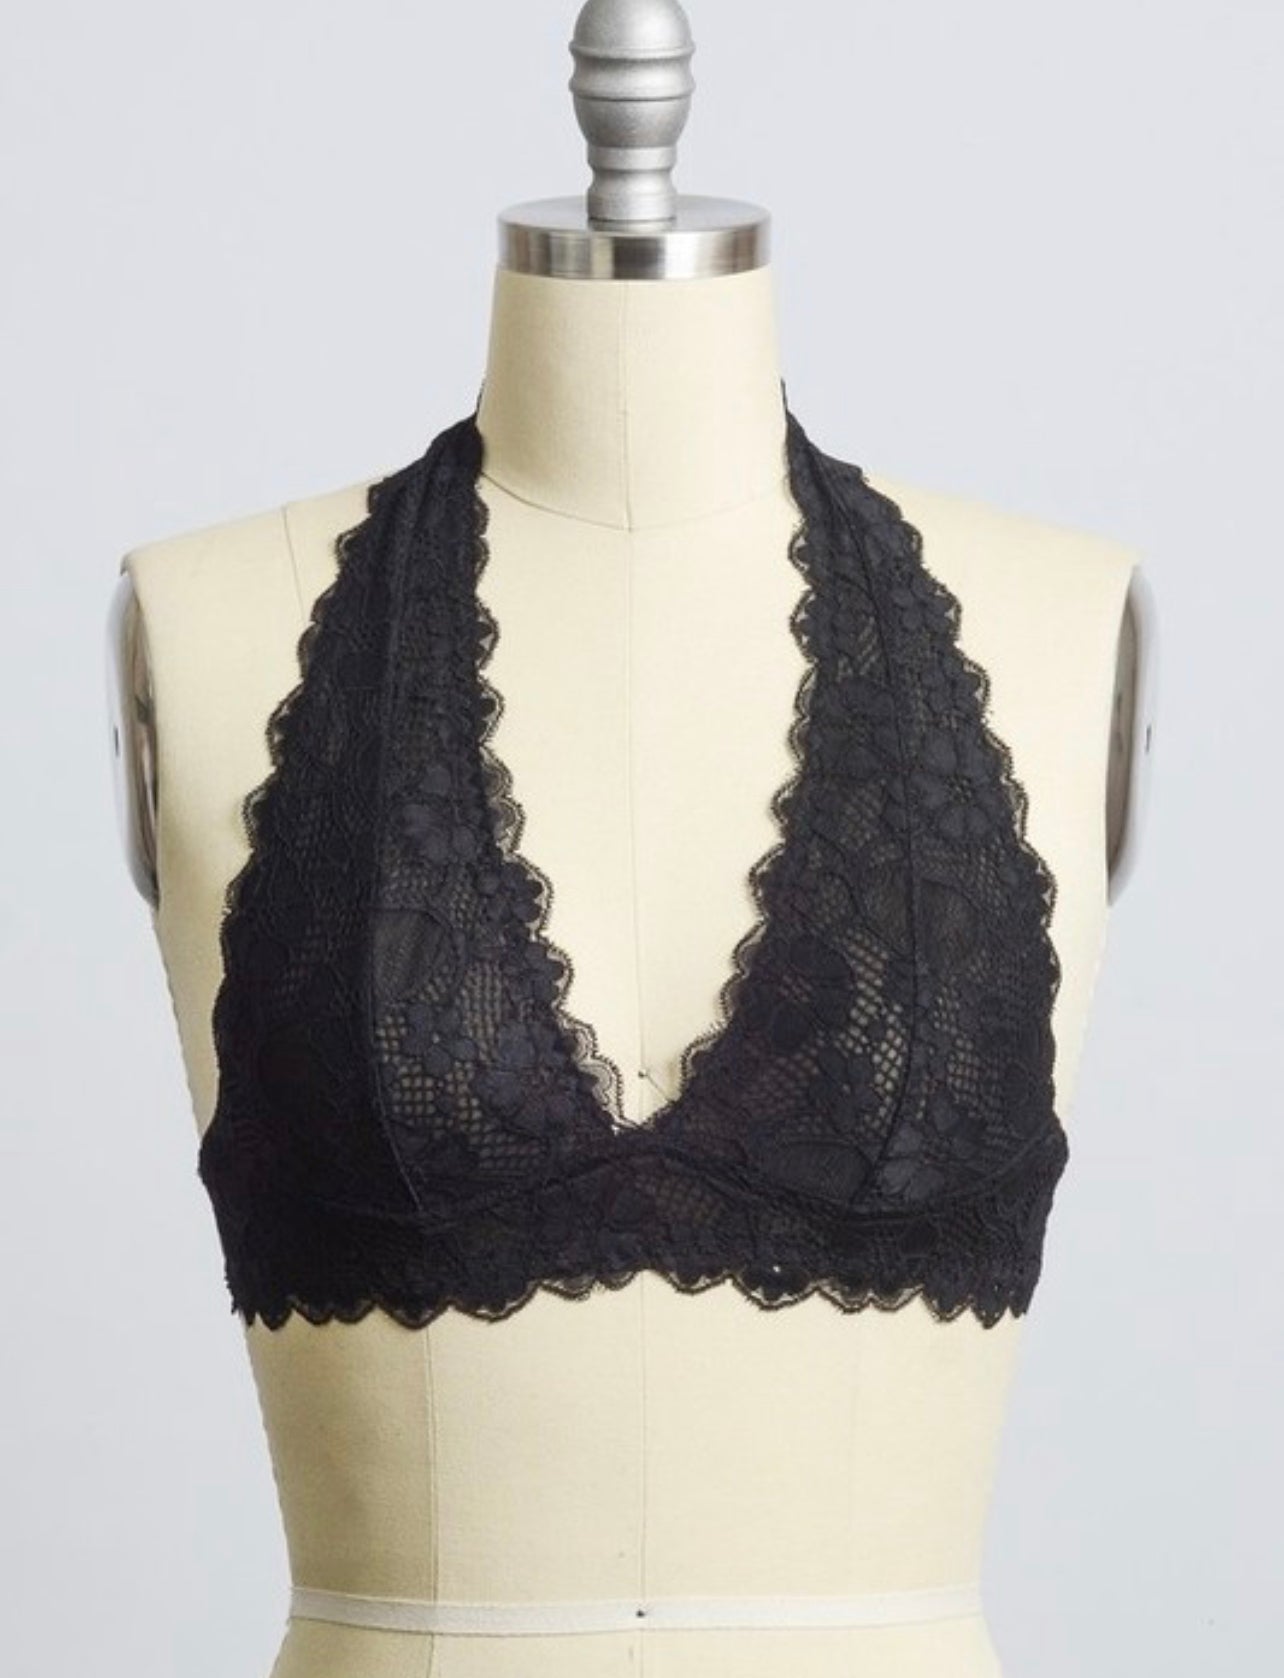 LACE HALTER BRALETTE BLACK – Chic by Ally B